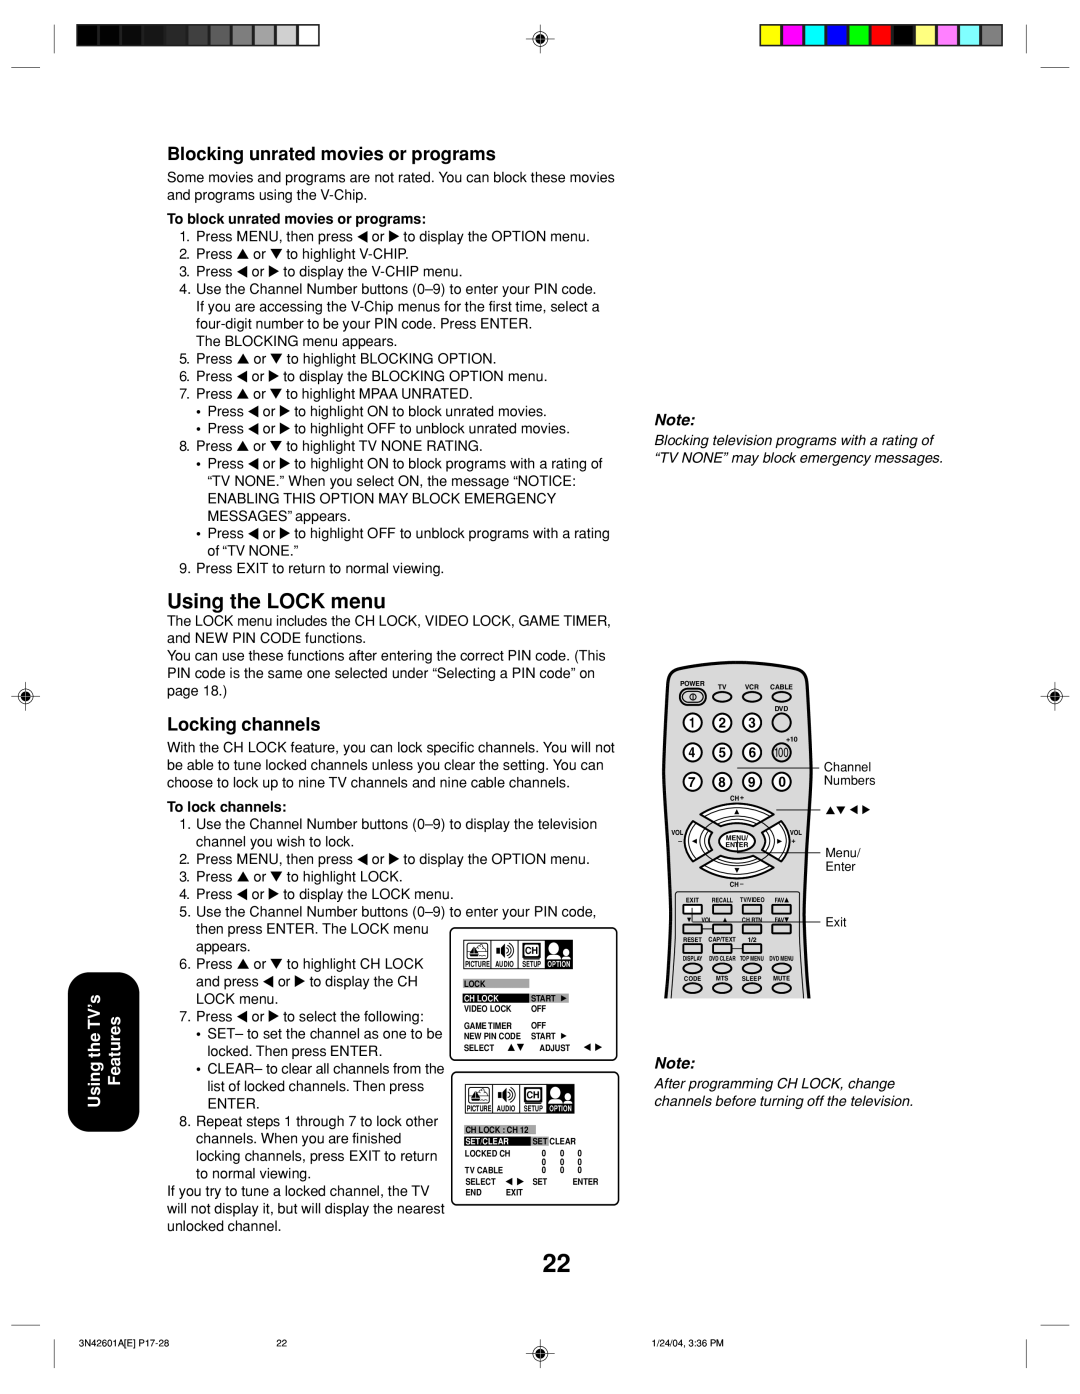 Toshiba 27A44 appendix Using the LOCK menu, Blocking unrated movies or programs, Locking channels, Using the TV’s Features 